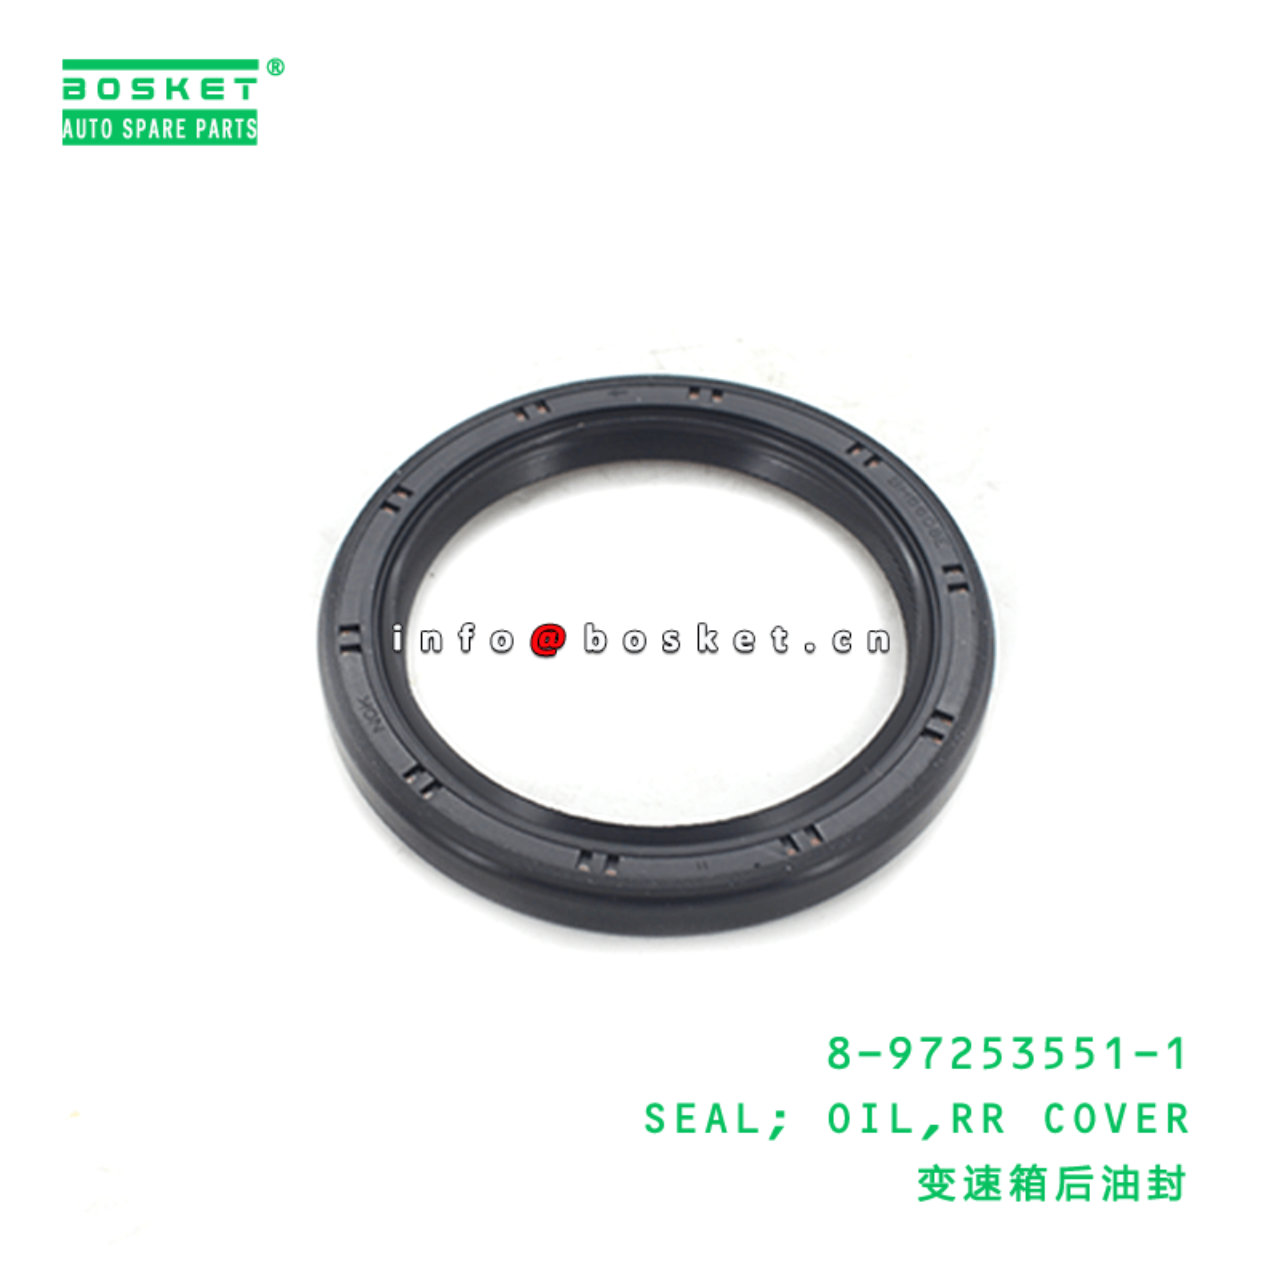  8-97253551-1 Rear Cover Oil Seal 8972535511 Suitable for ISUZU NQR70 4HK1